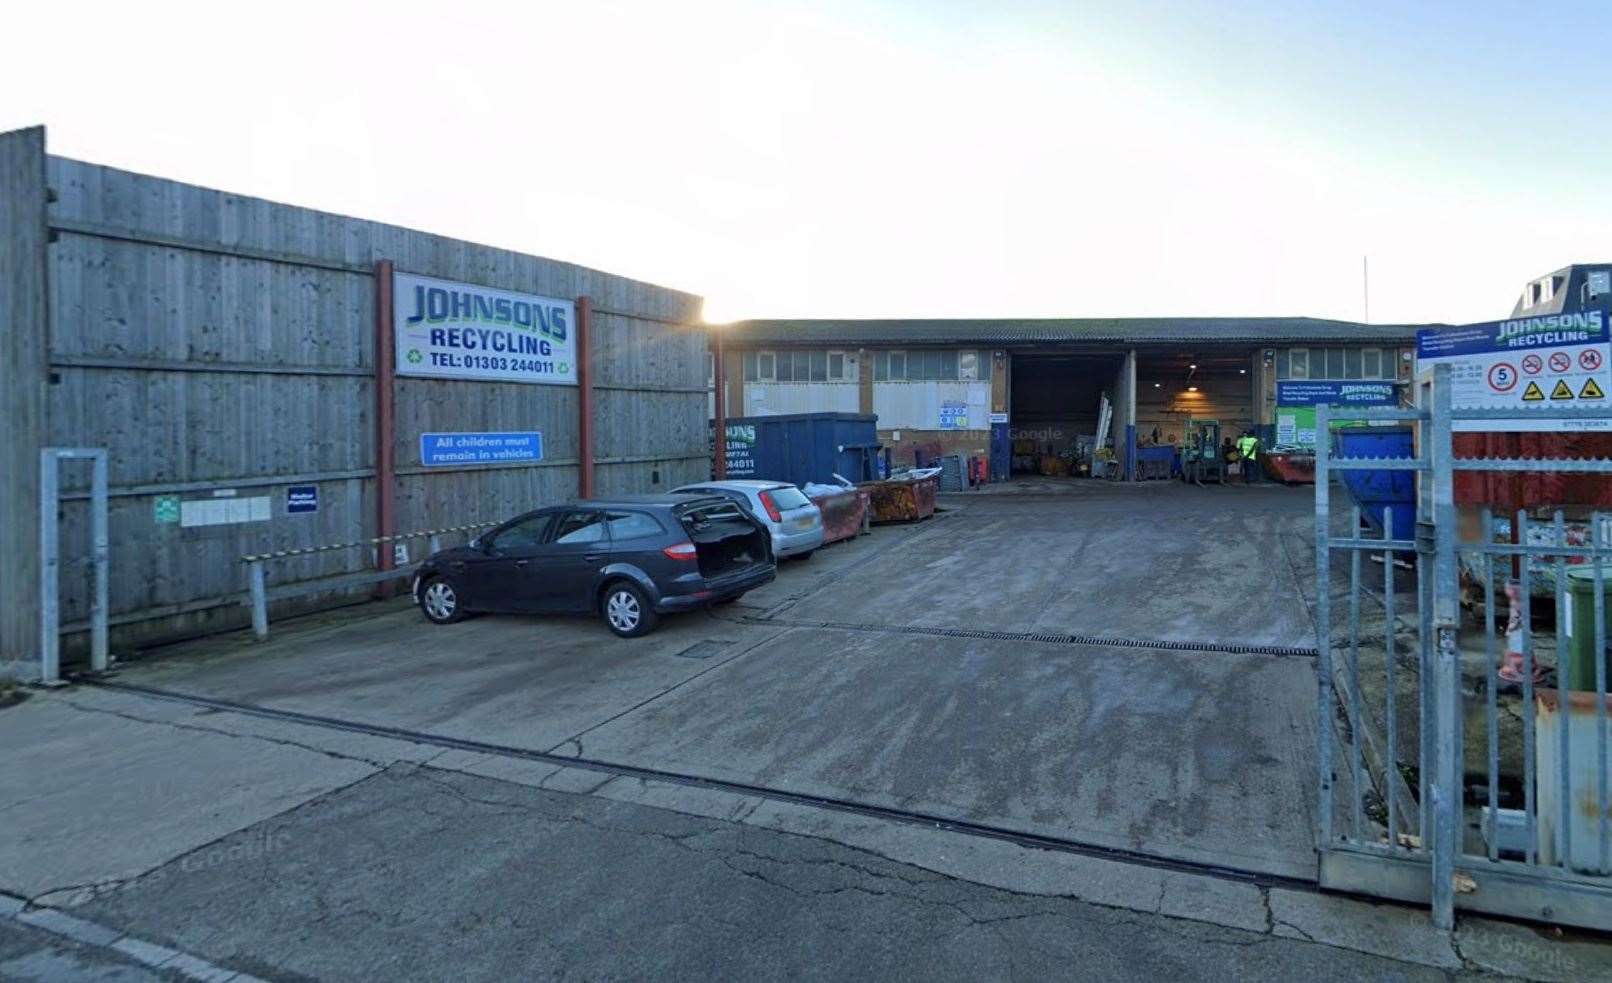 A fire broke out at Johnsons Recycling Scrap Metal and Waste Transfer Station in Folkestone late on Sunday night. Picture: Google